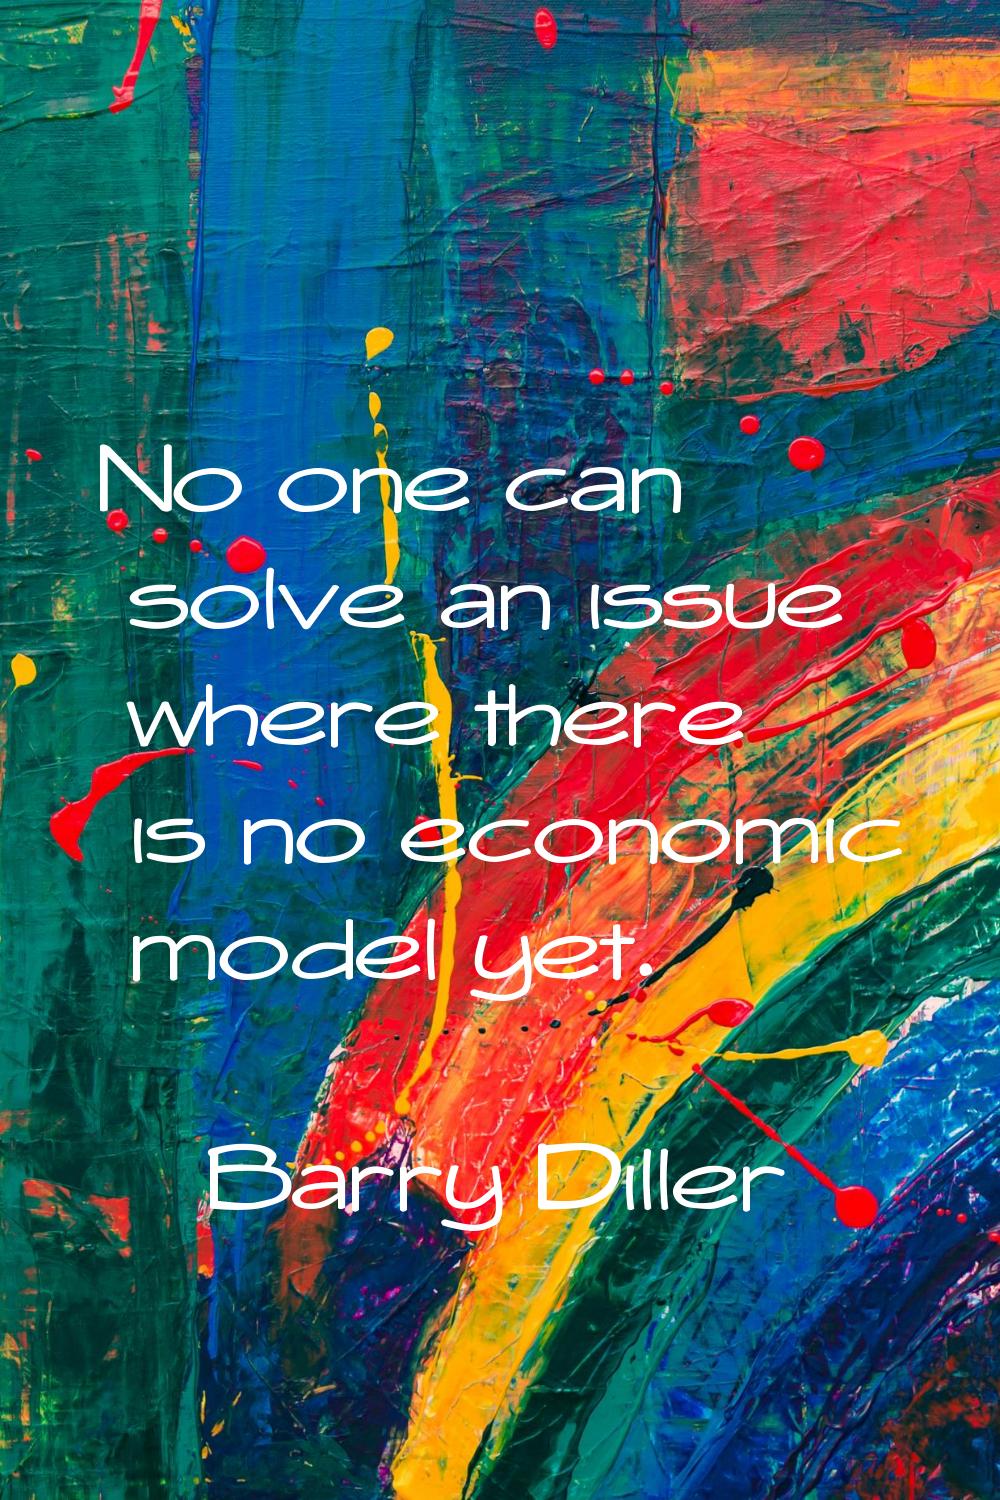 No one can solve an issue where there is no economic model yet.